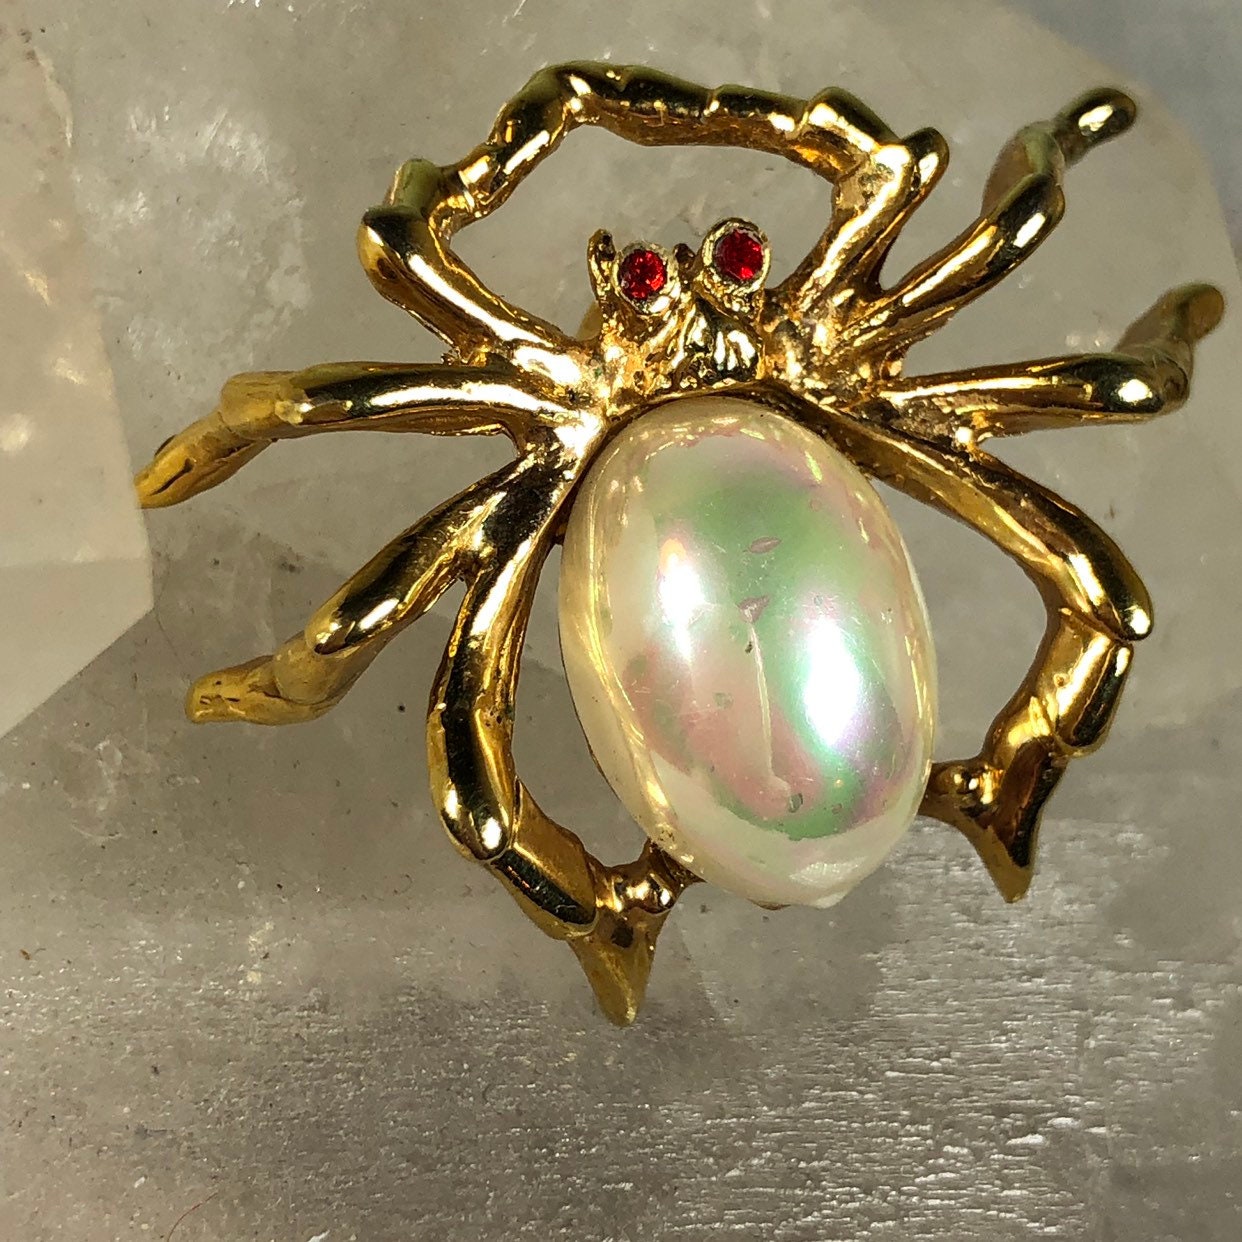 Vintage Costume Jewellery Gold Toned Spider Brooch 